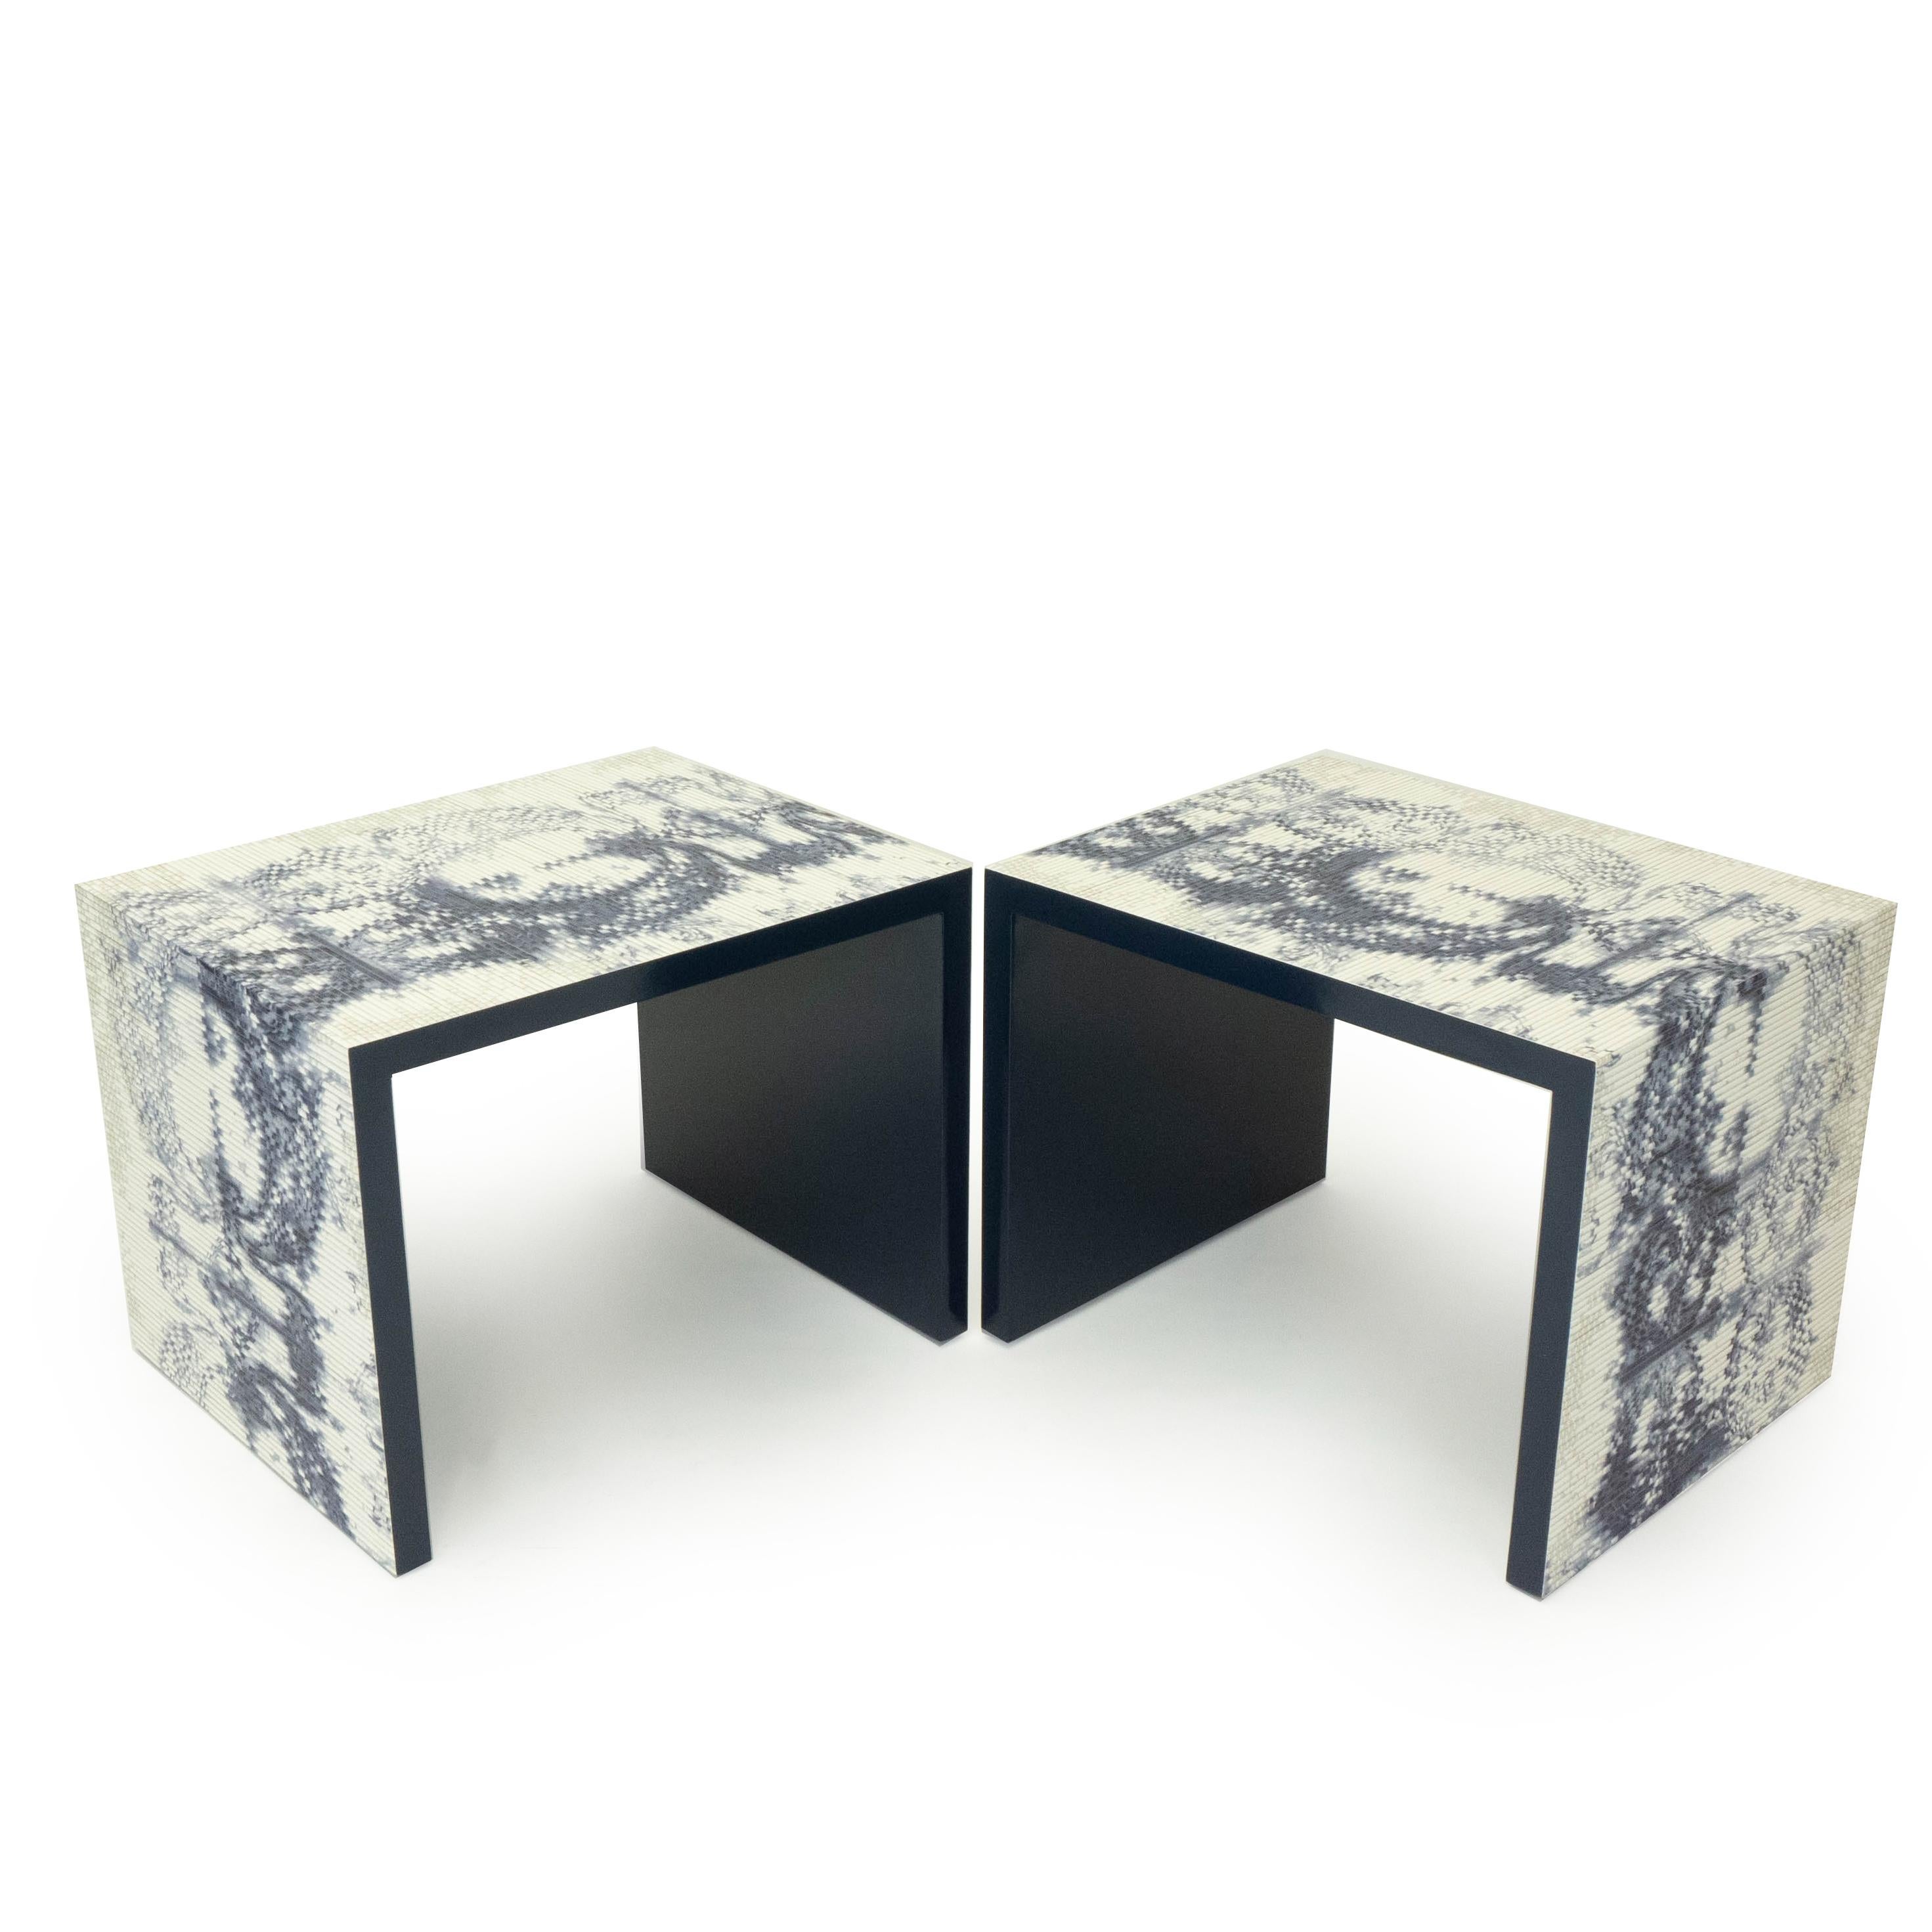 American Modern Square Side Tables with Textured Print Finish For Sale